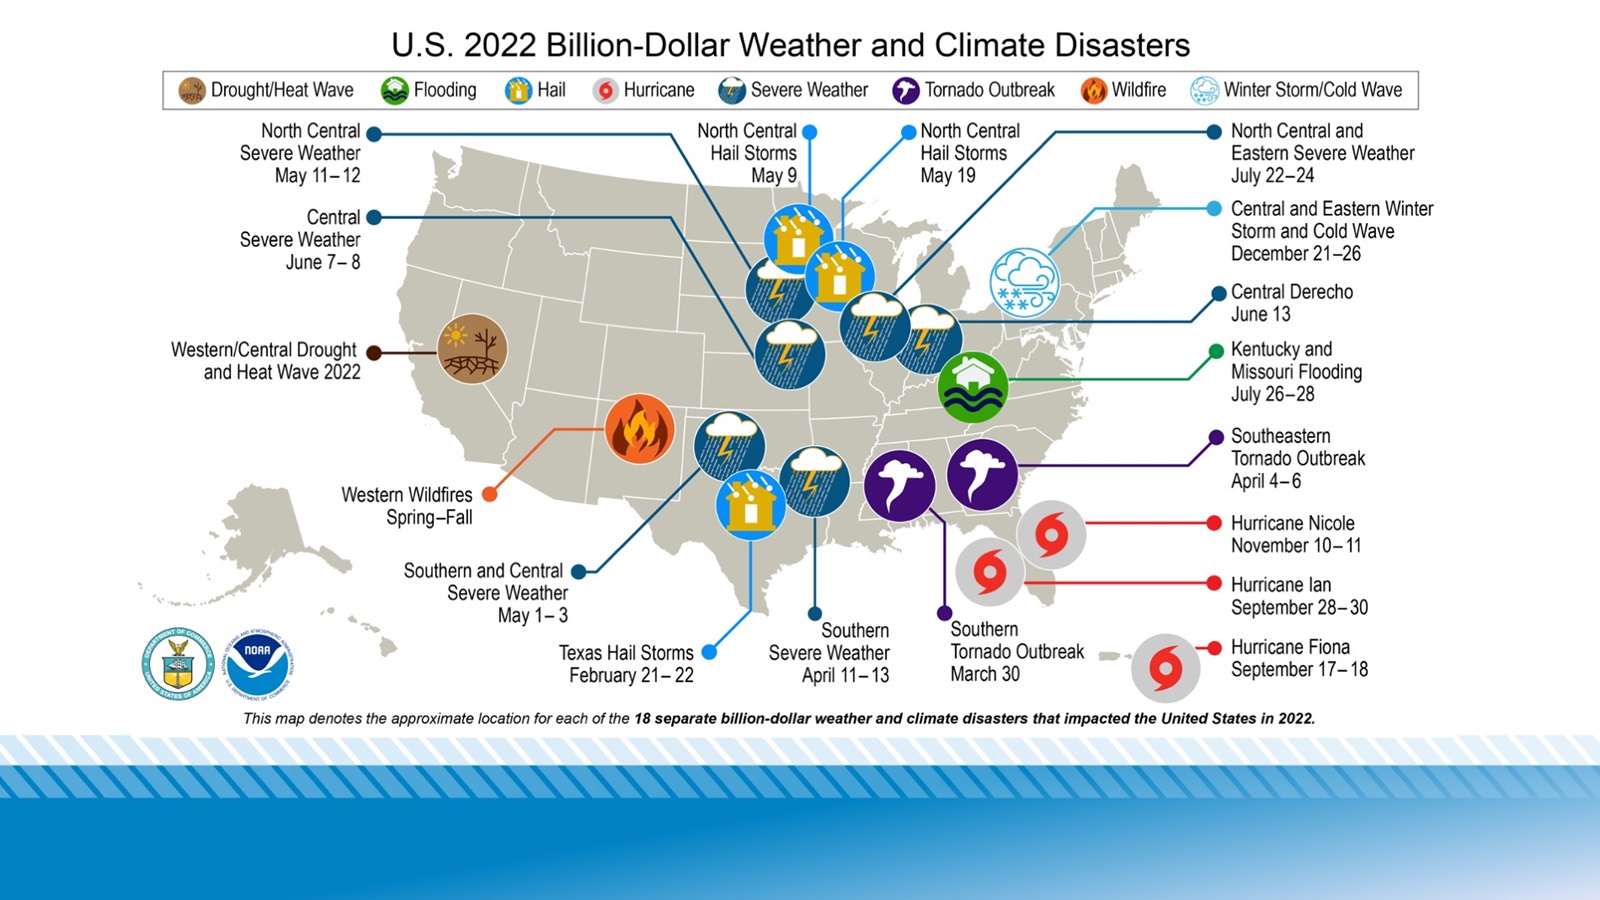 A NOAA National Centers for Environmental Information map showing billion-dollar weather and climate disasters